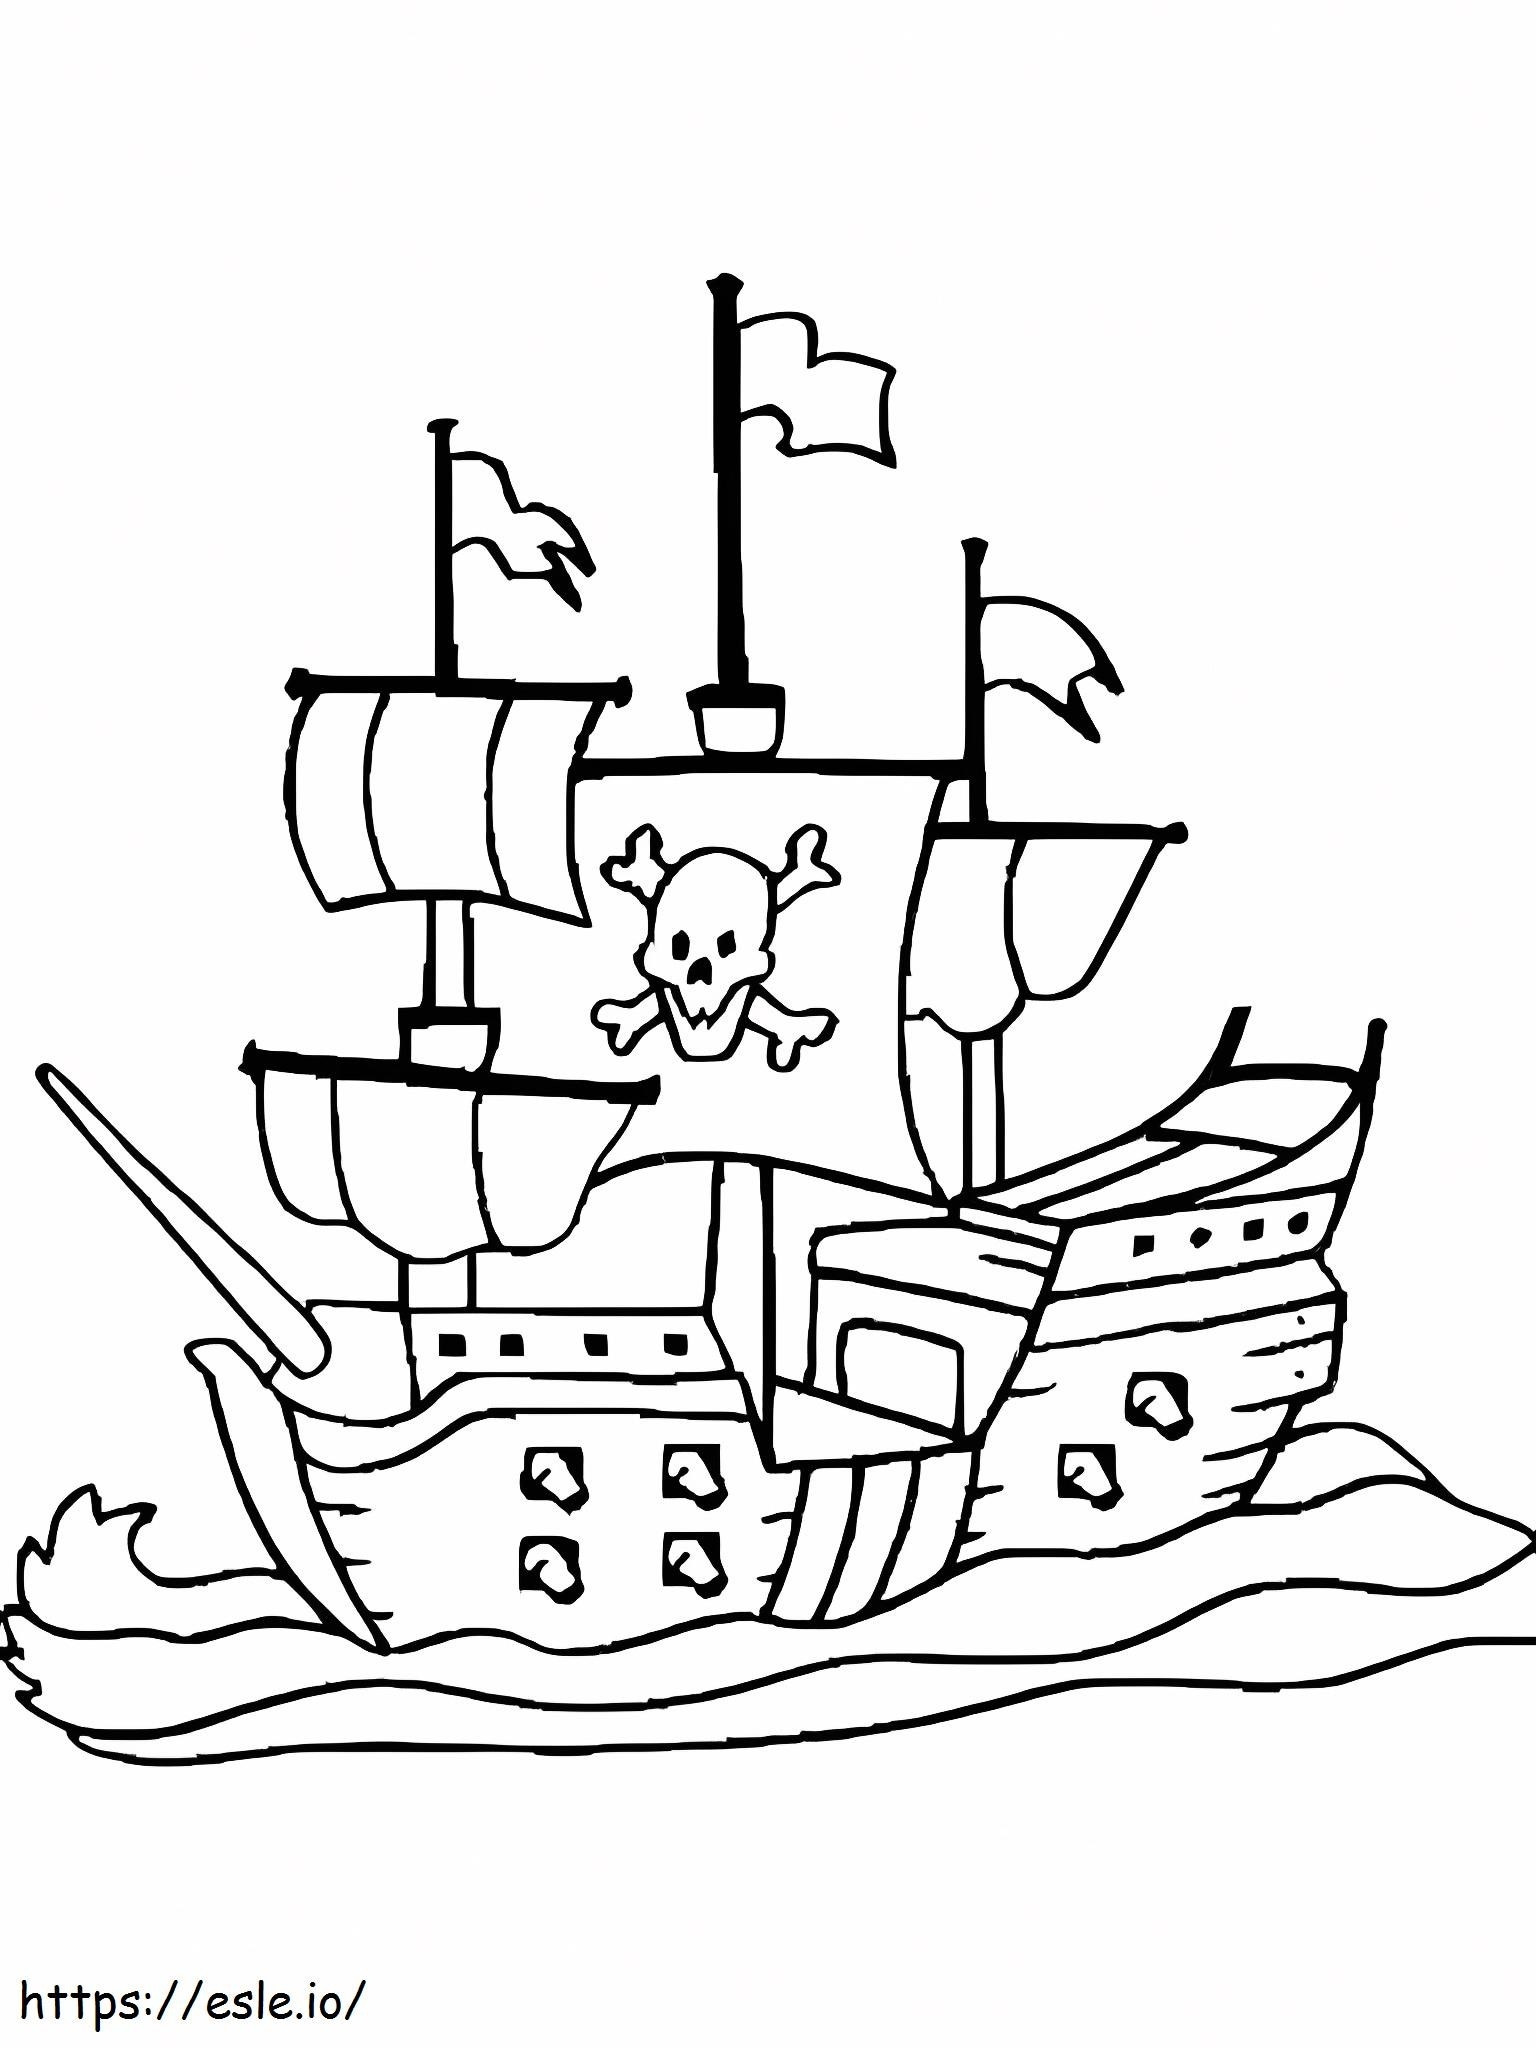 Cool Pirate Ship coloring page